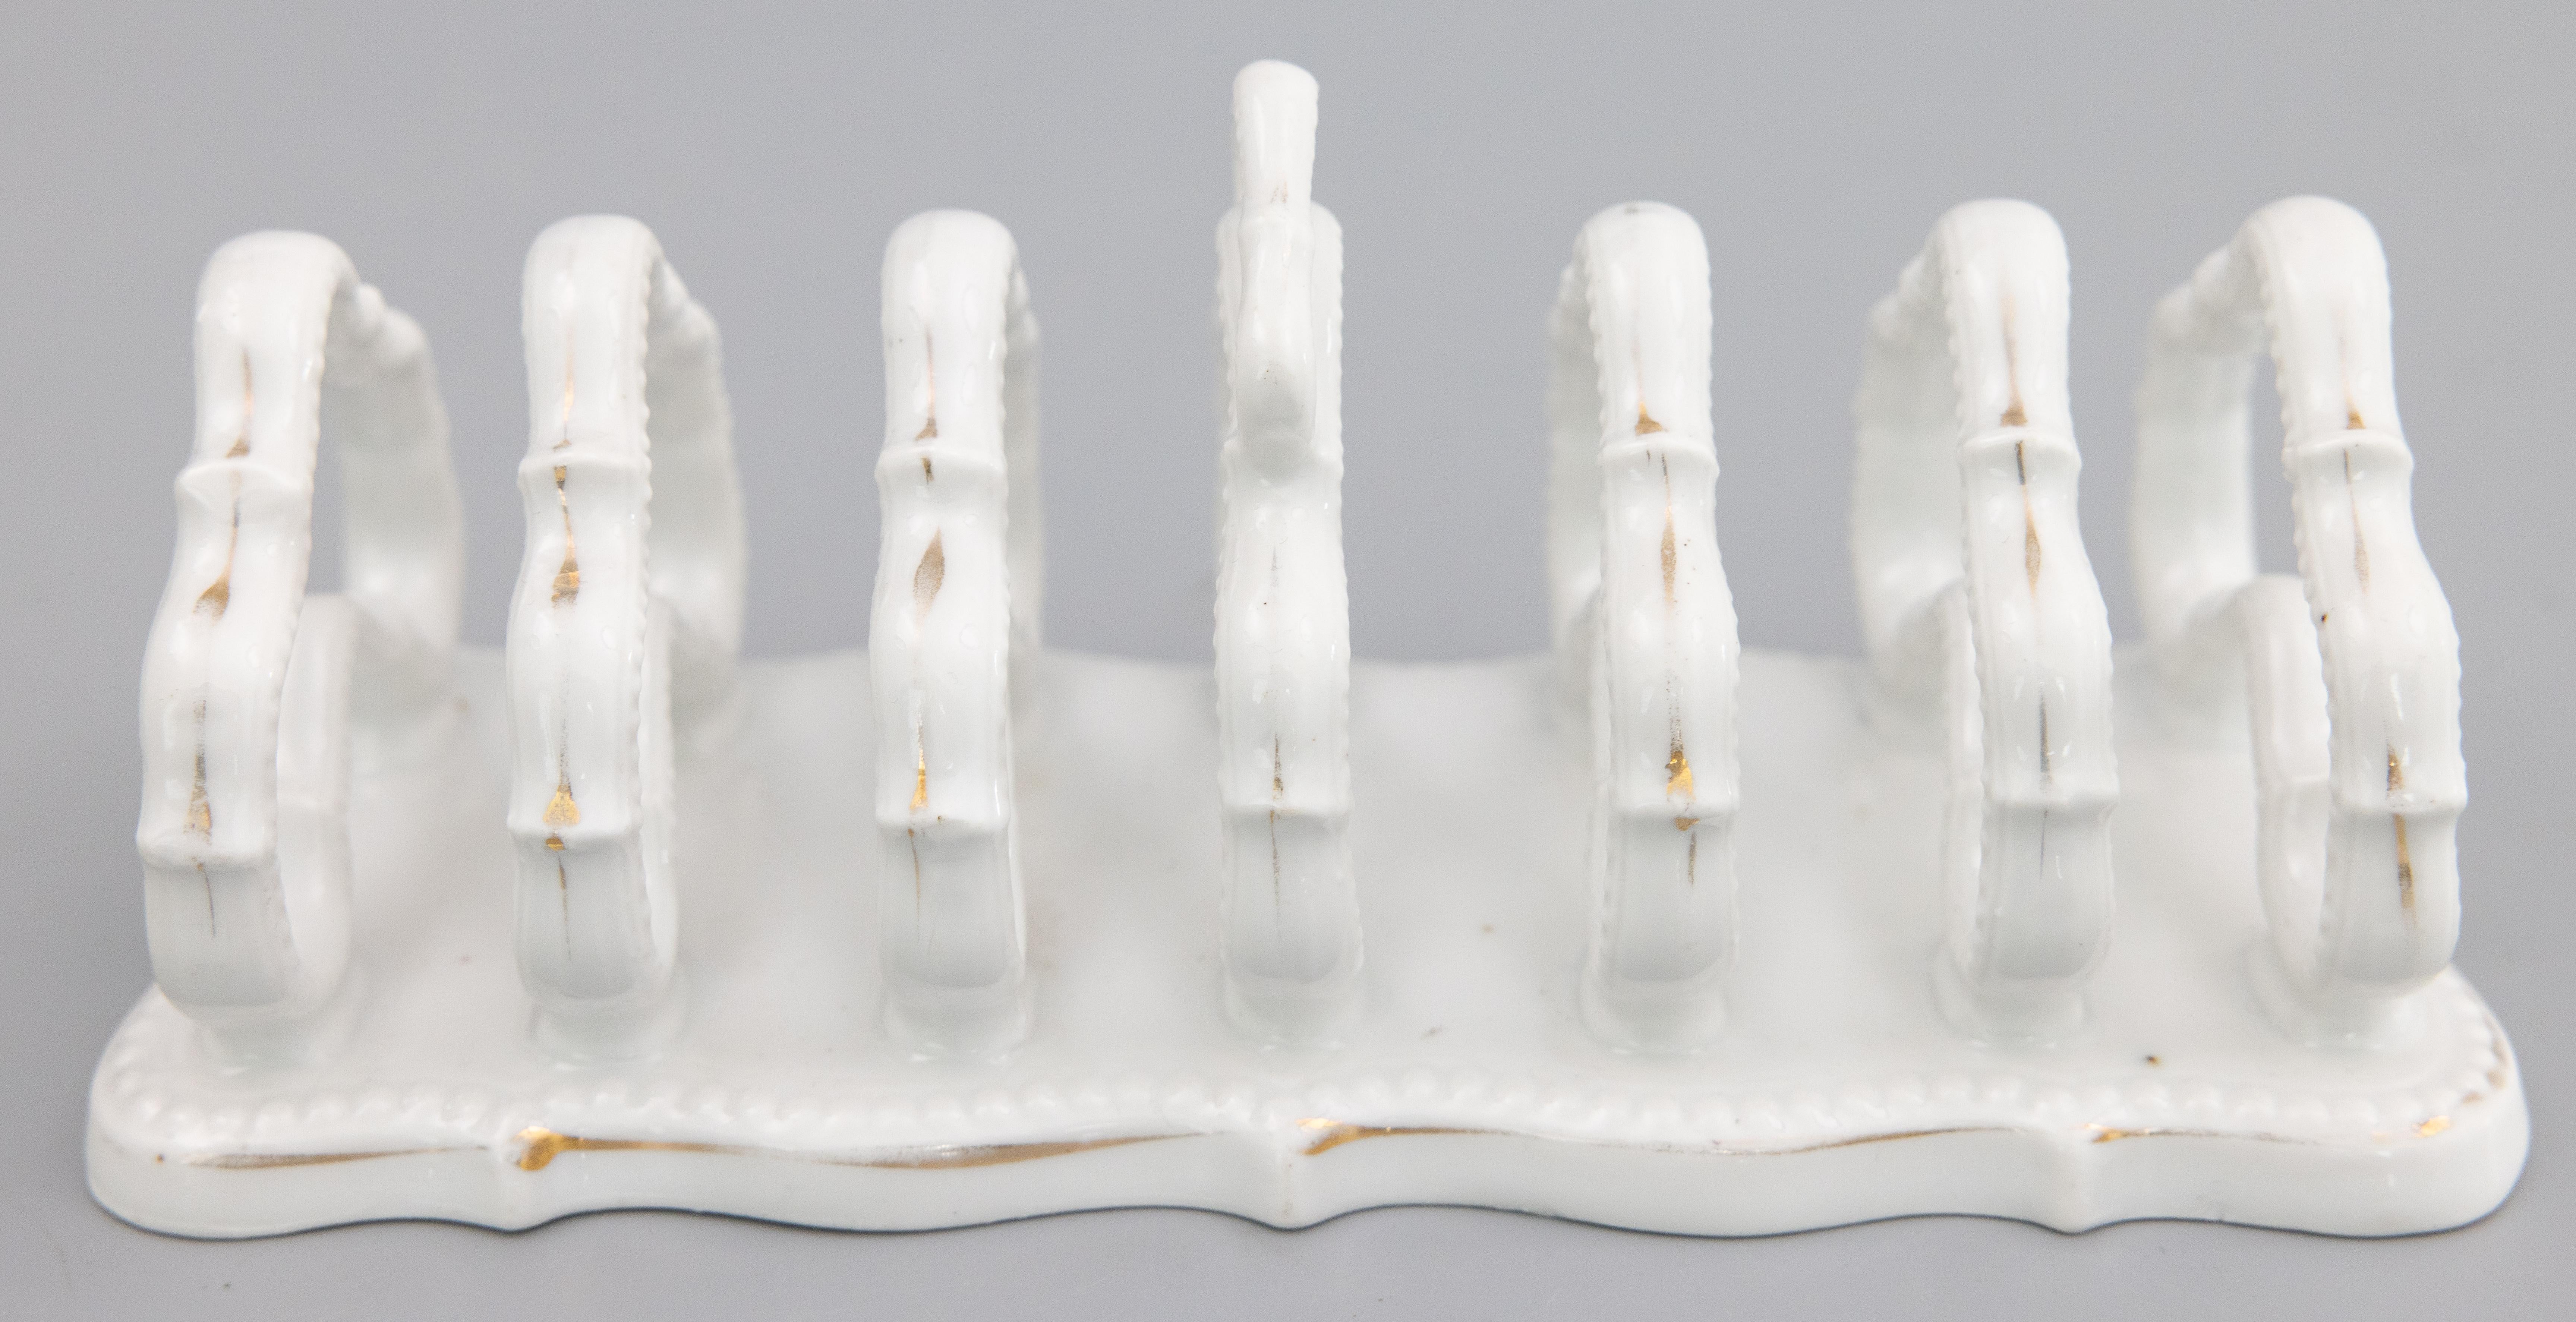 A lovely antique English white ironstone six slice toast rack, circa 1910. This beautiful toast rack has lovely gilt accents, beaded edge, and scalloped design. It would be wonderful for serving toast or could also be used as a letter